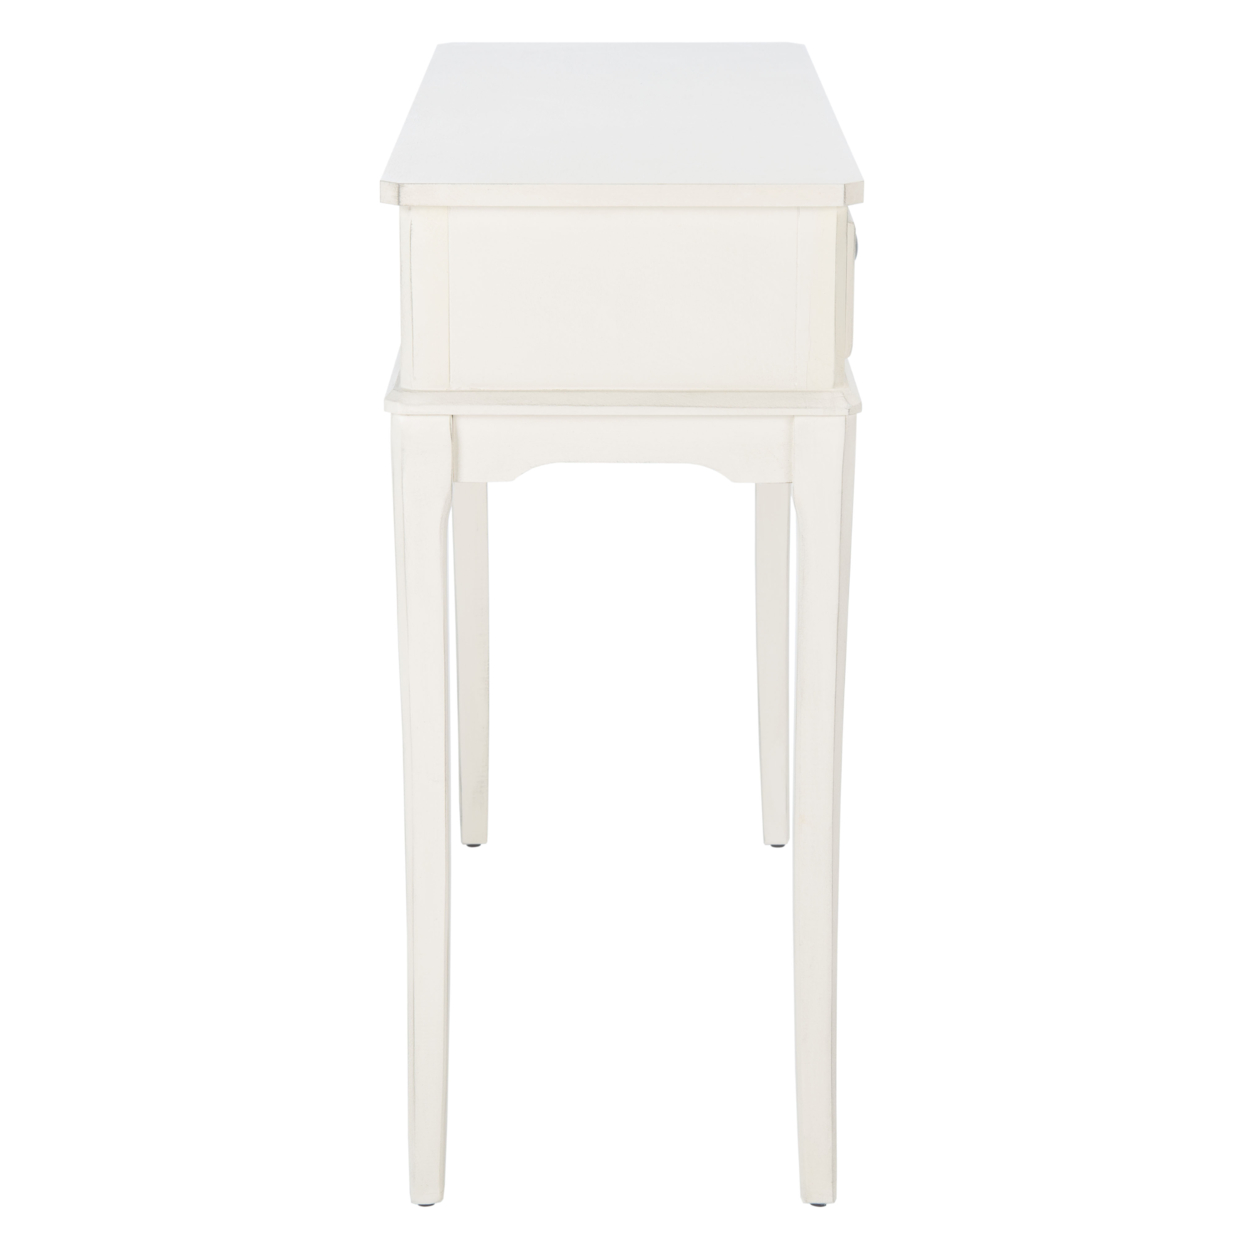 SAFAVIEH Opal 2-Drawer Console Table Distressed / White